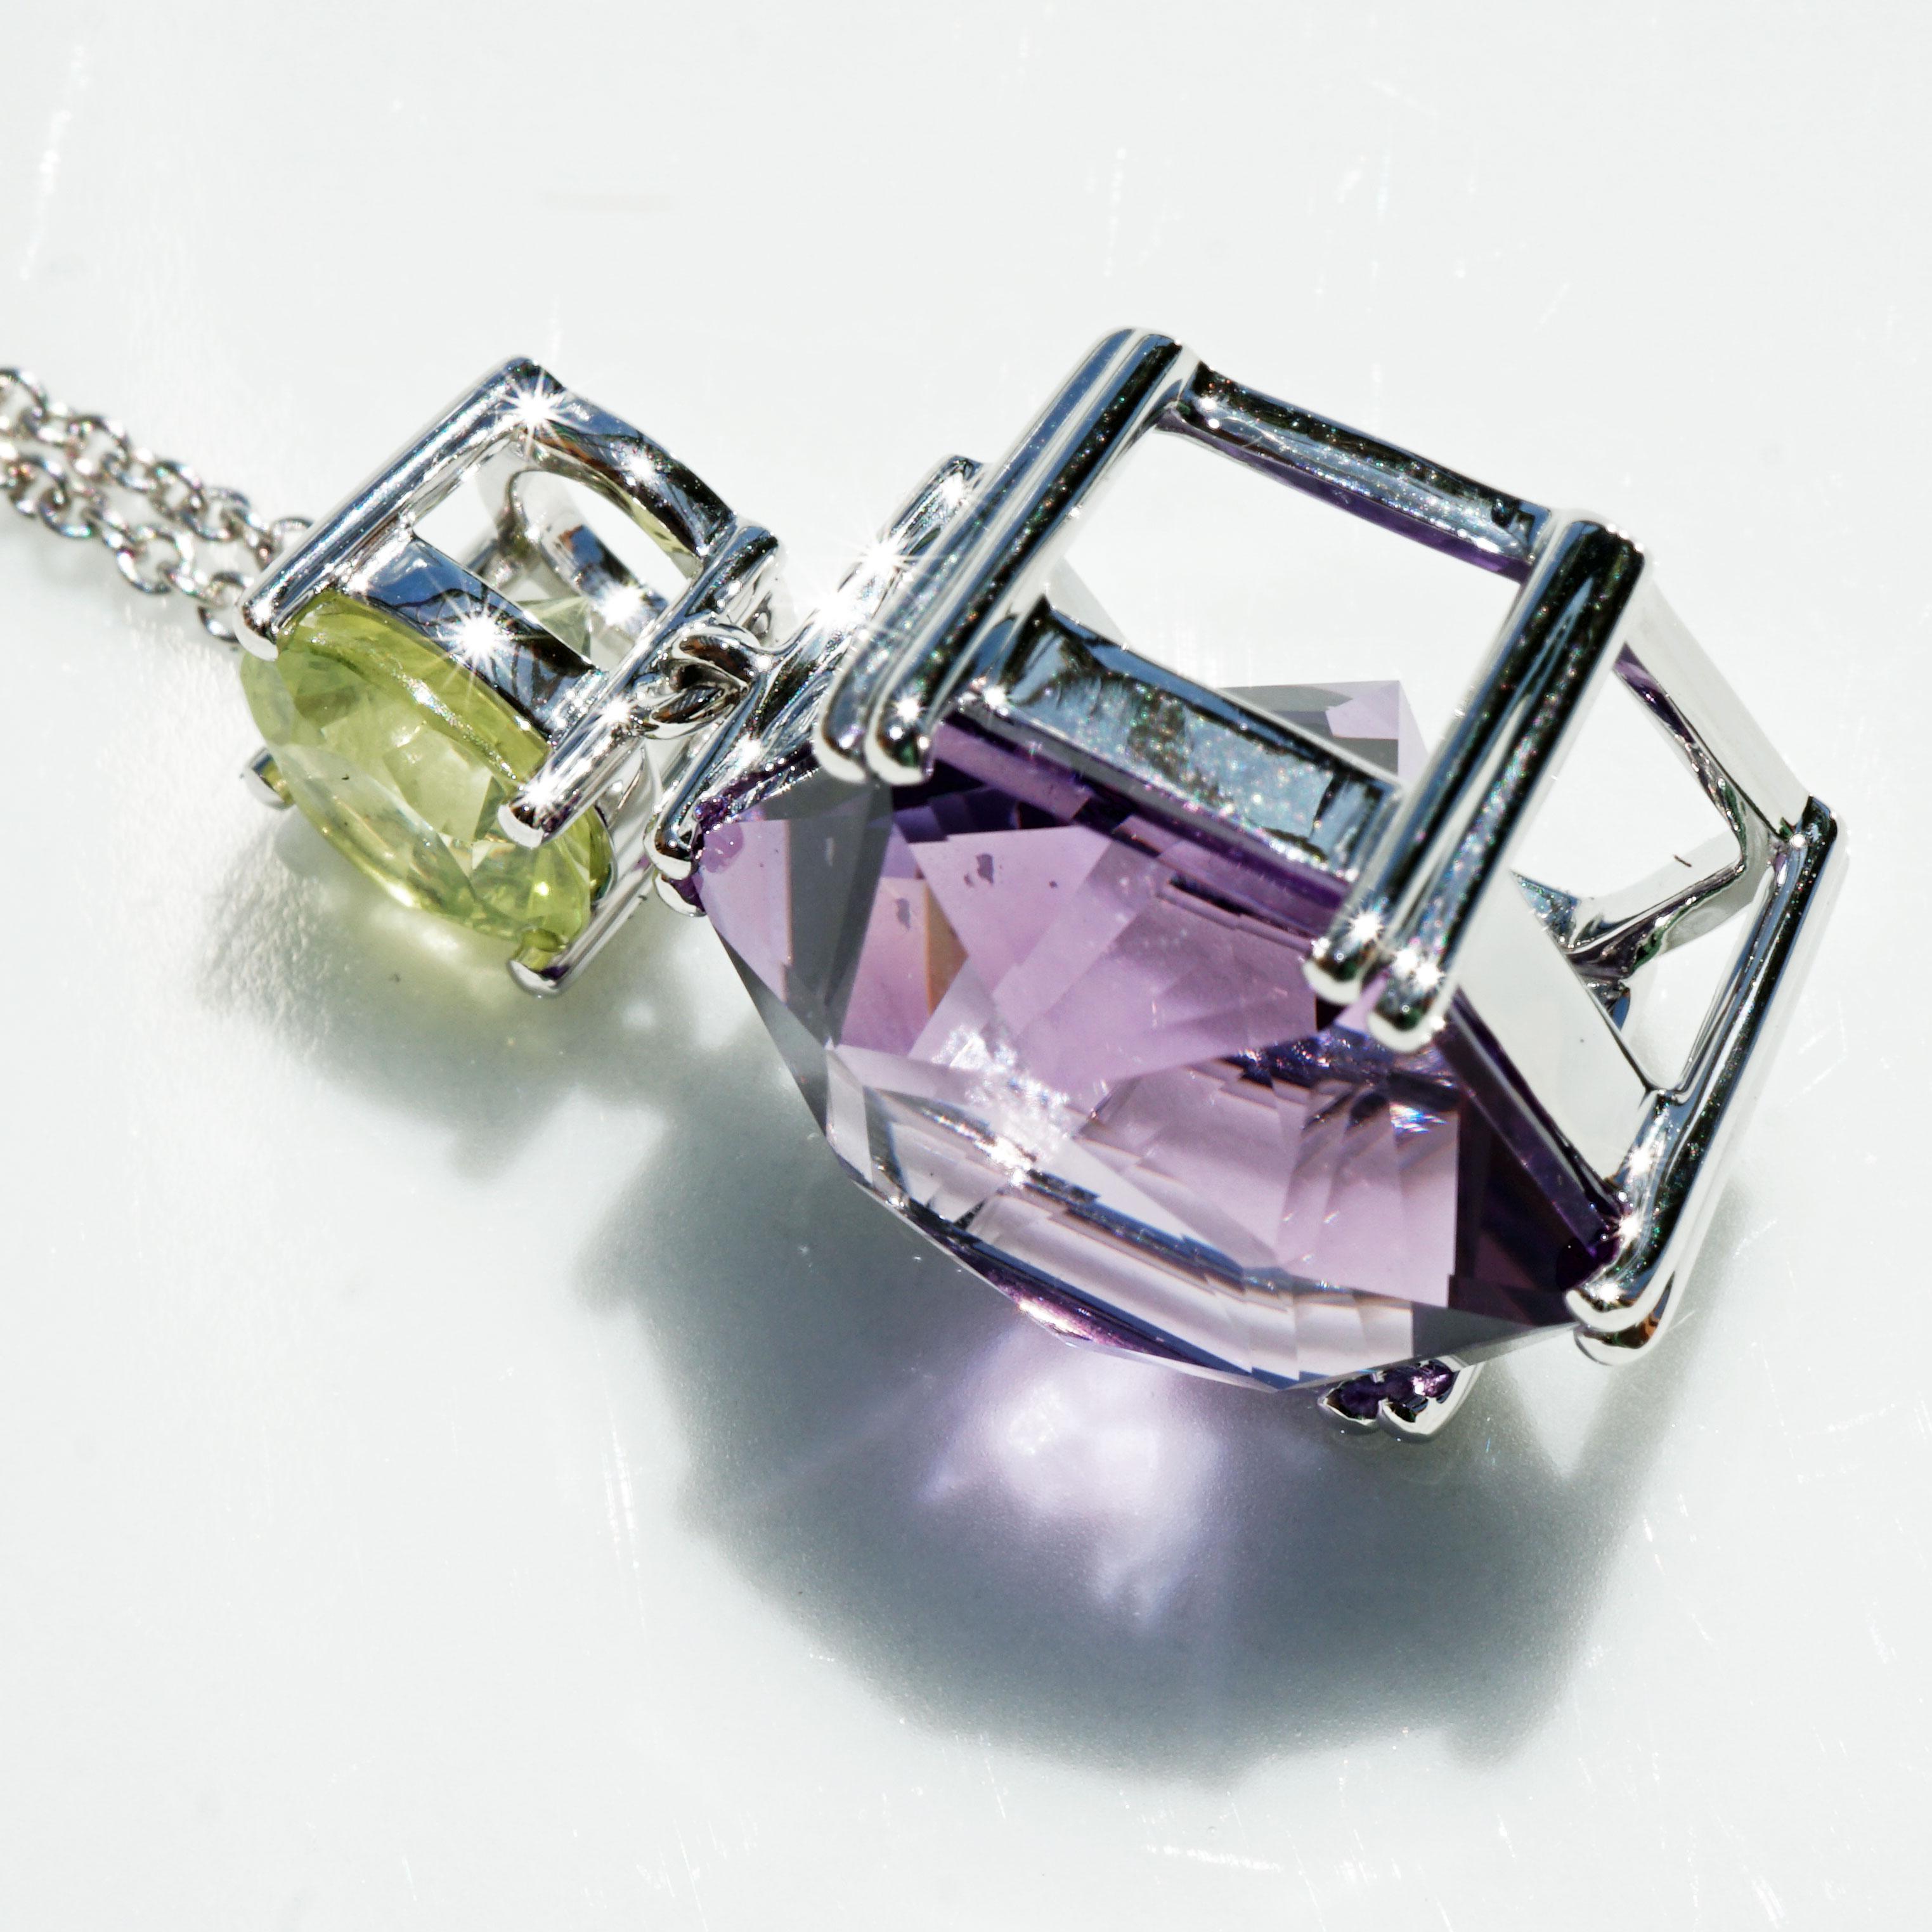 Chrysoberyll Amethyst Pendant with Chain neverseen Colors 10 ct Star Cut Brazil In New Condition For Sale In Viena, Viena